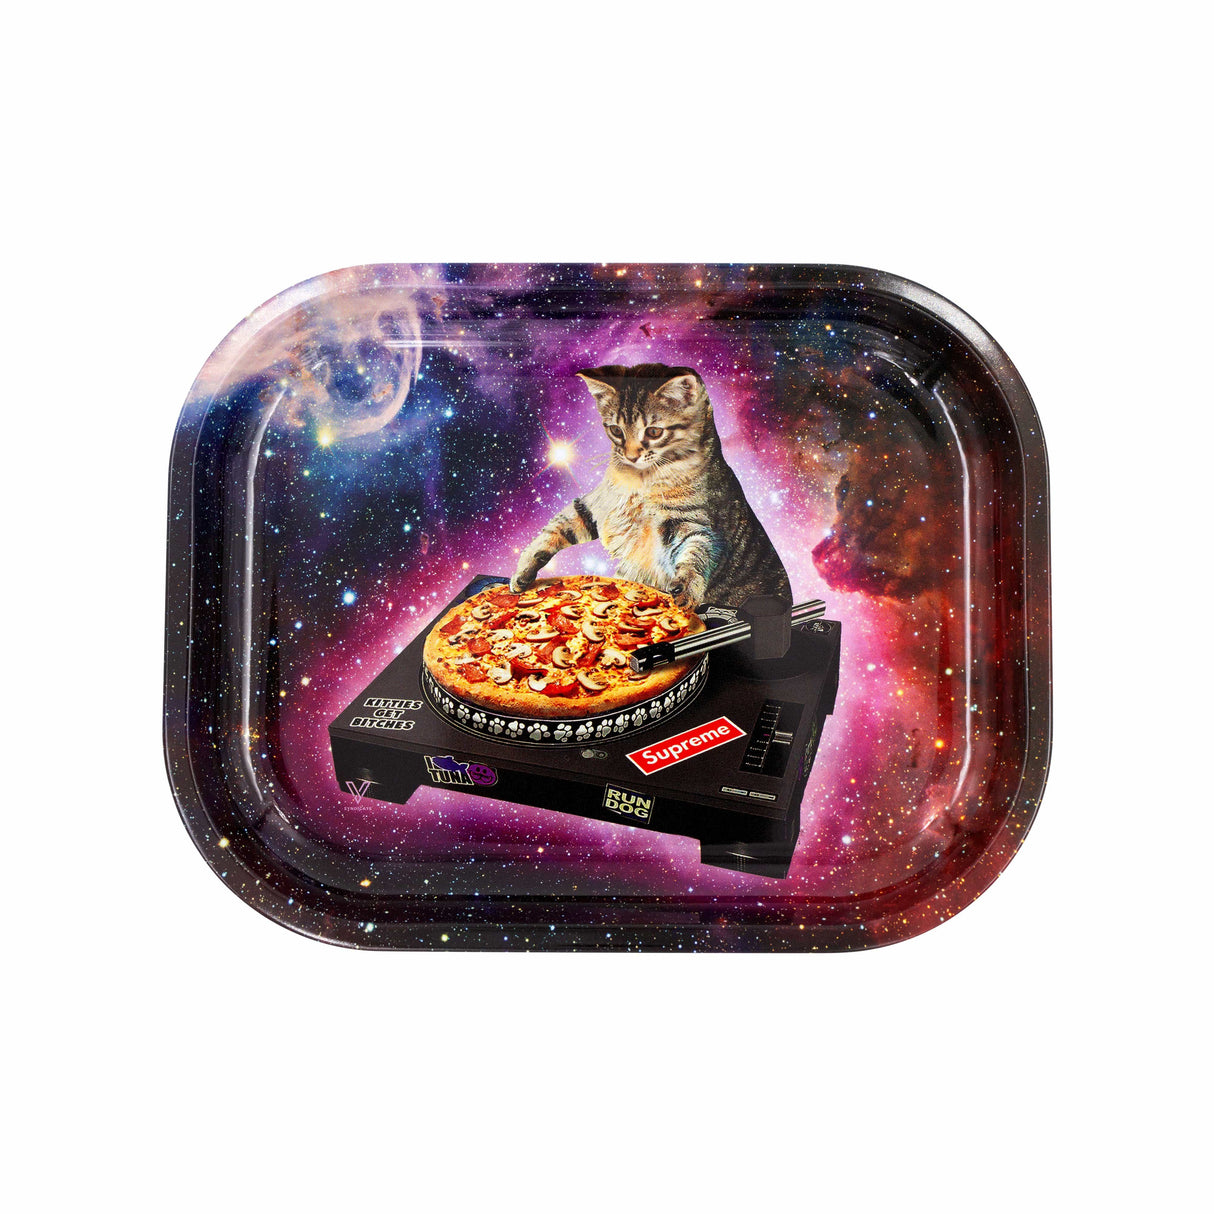 V Syndicate Pussy Vinyl Metal Rollin' Tray with Cosmic Cat Design - Compact Size